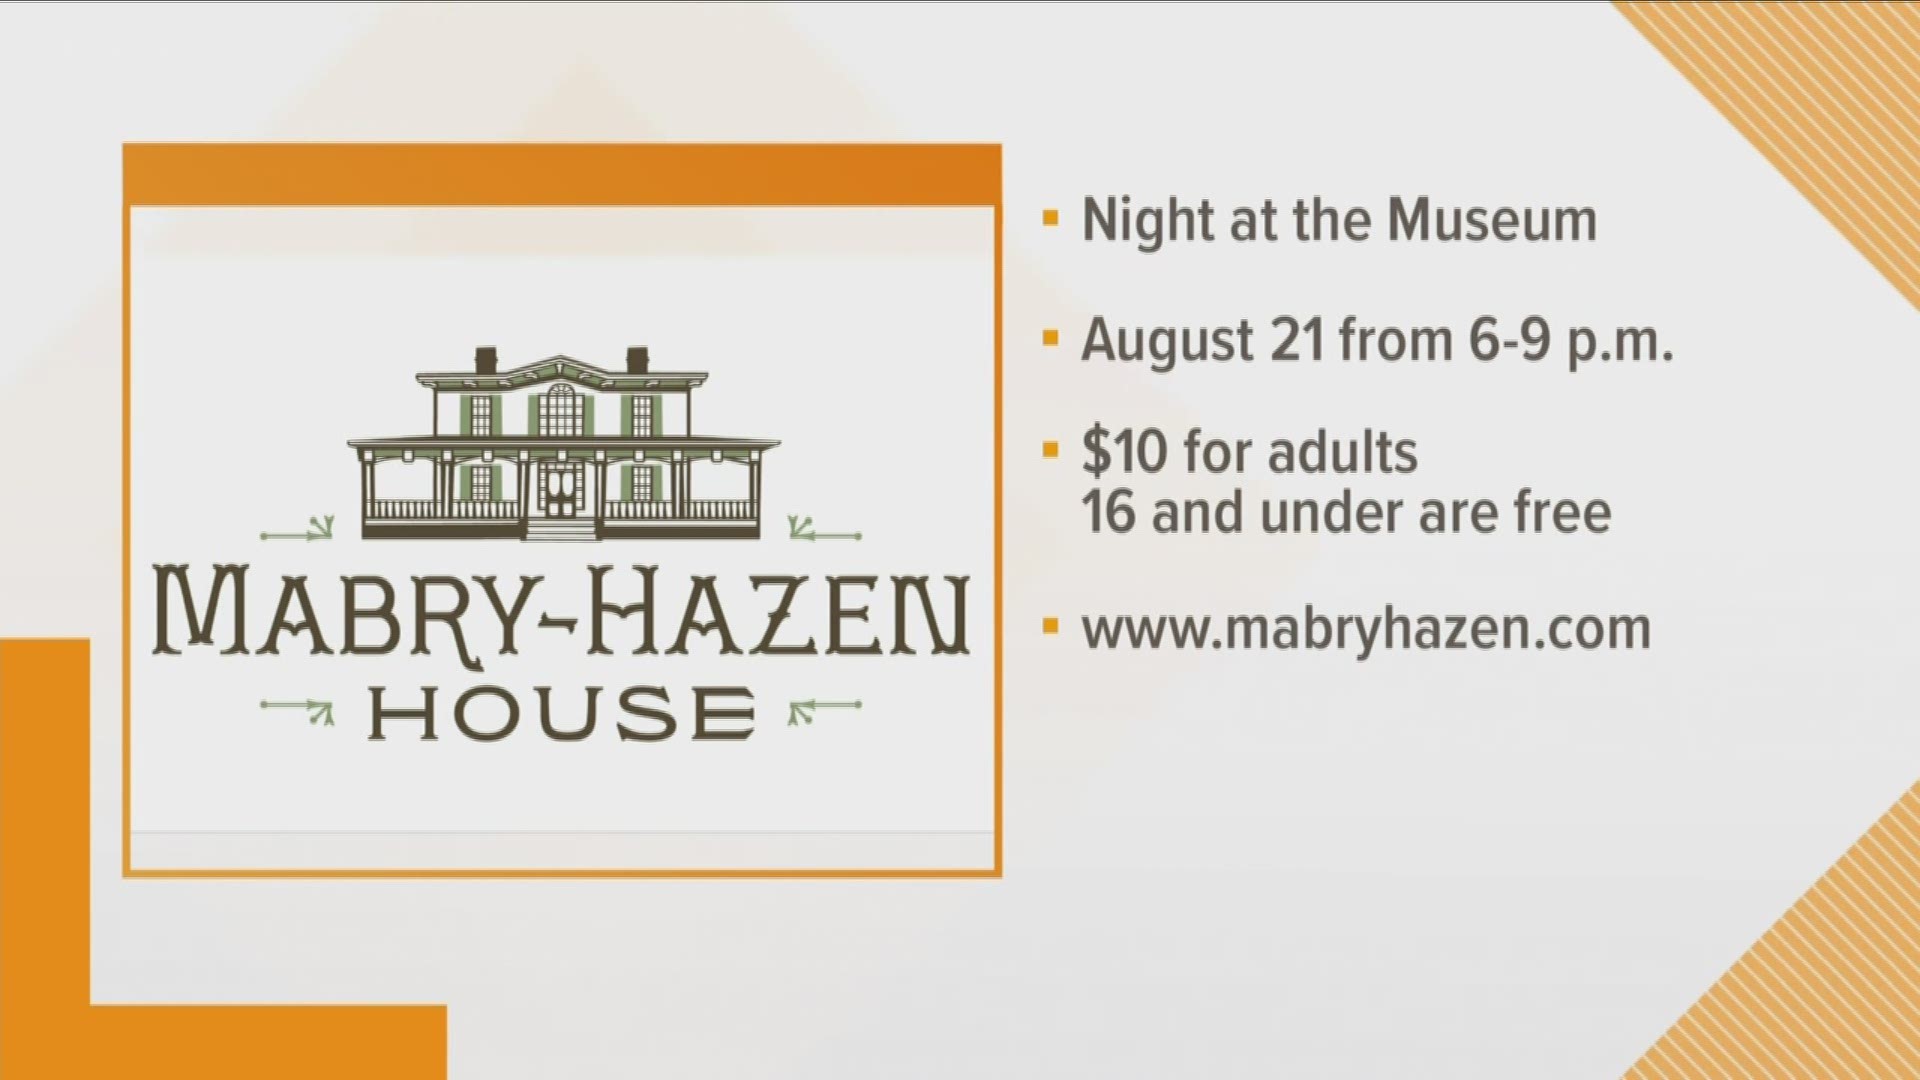 Mabry-Hazen house talks about its upcoming Night at the Museum on August 21st